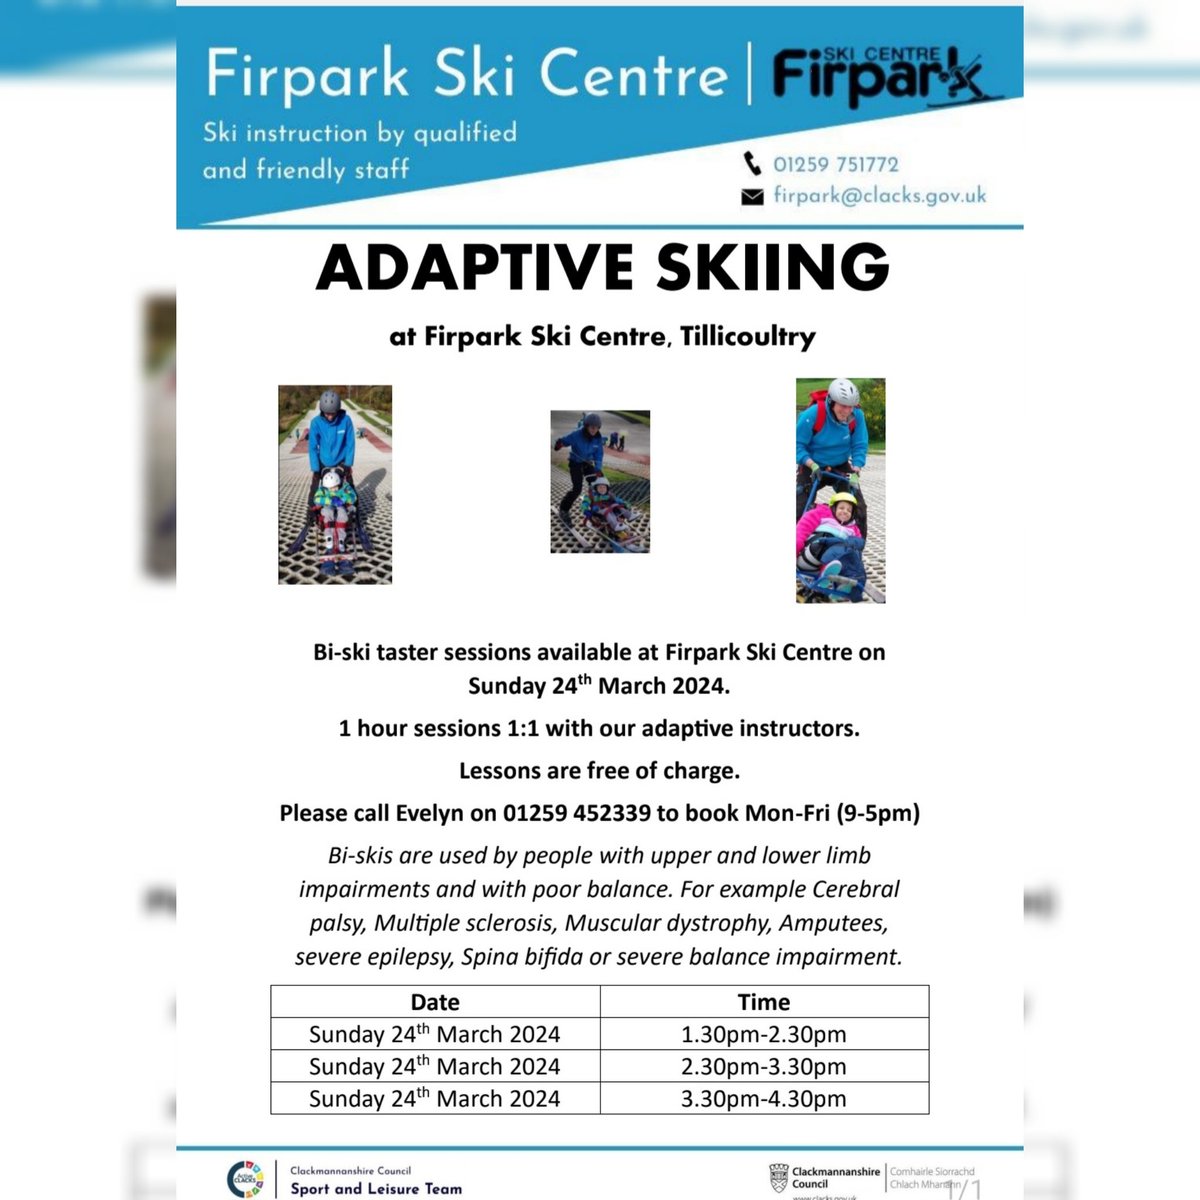 We are now able to offer further come-and-try sessions for customers requiring our adaptive bi-ski. Sessions take place on Sunday 24th March. Details are below. Please call Evelyn on 01259 452339 (Mon-Fri 9-5pm) to book. ⛷️⛷️